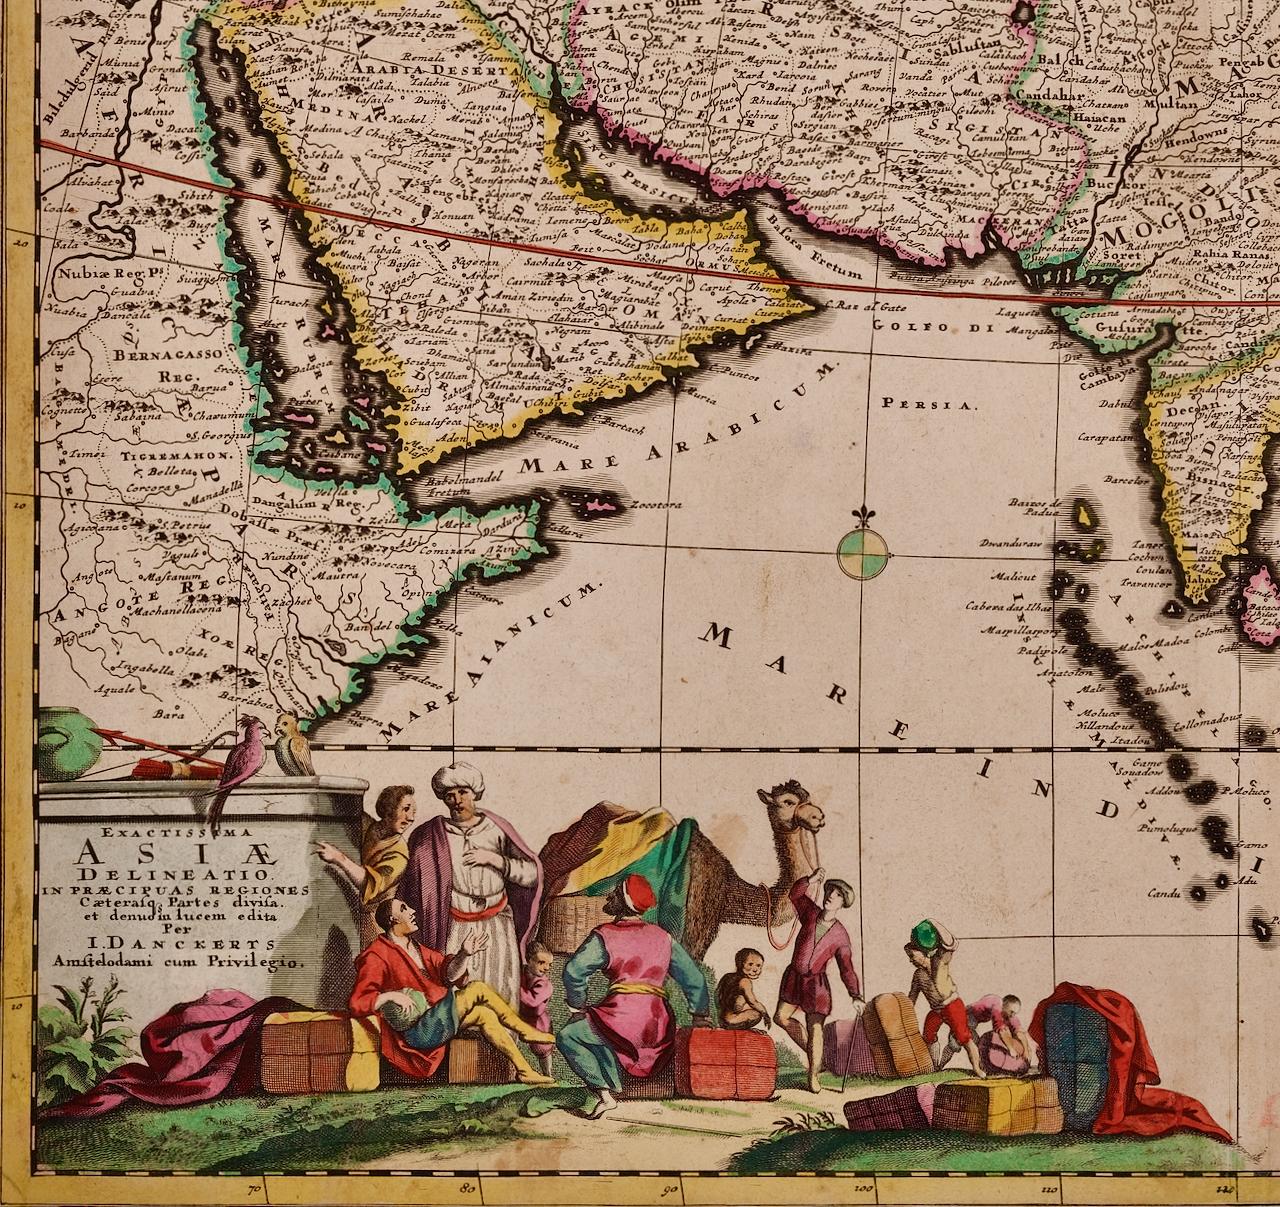 This is a scarce 17th century beautifully hand-colored copperplate engraved map of Asia entitled “Exactissima Asiae Delineatio in Praecipuas Regiones Caerterasque Partes divisa et denuo in lucem edita” by the Dutch cartographer Justus Danckerts. It